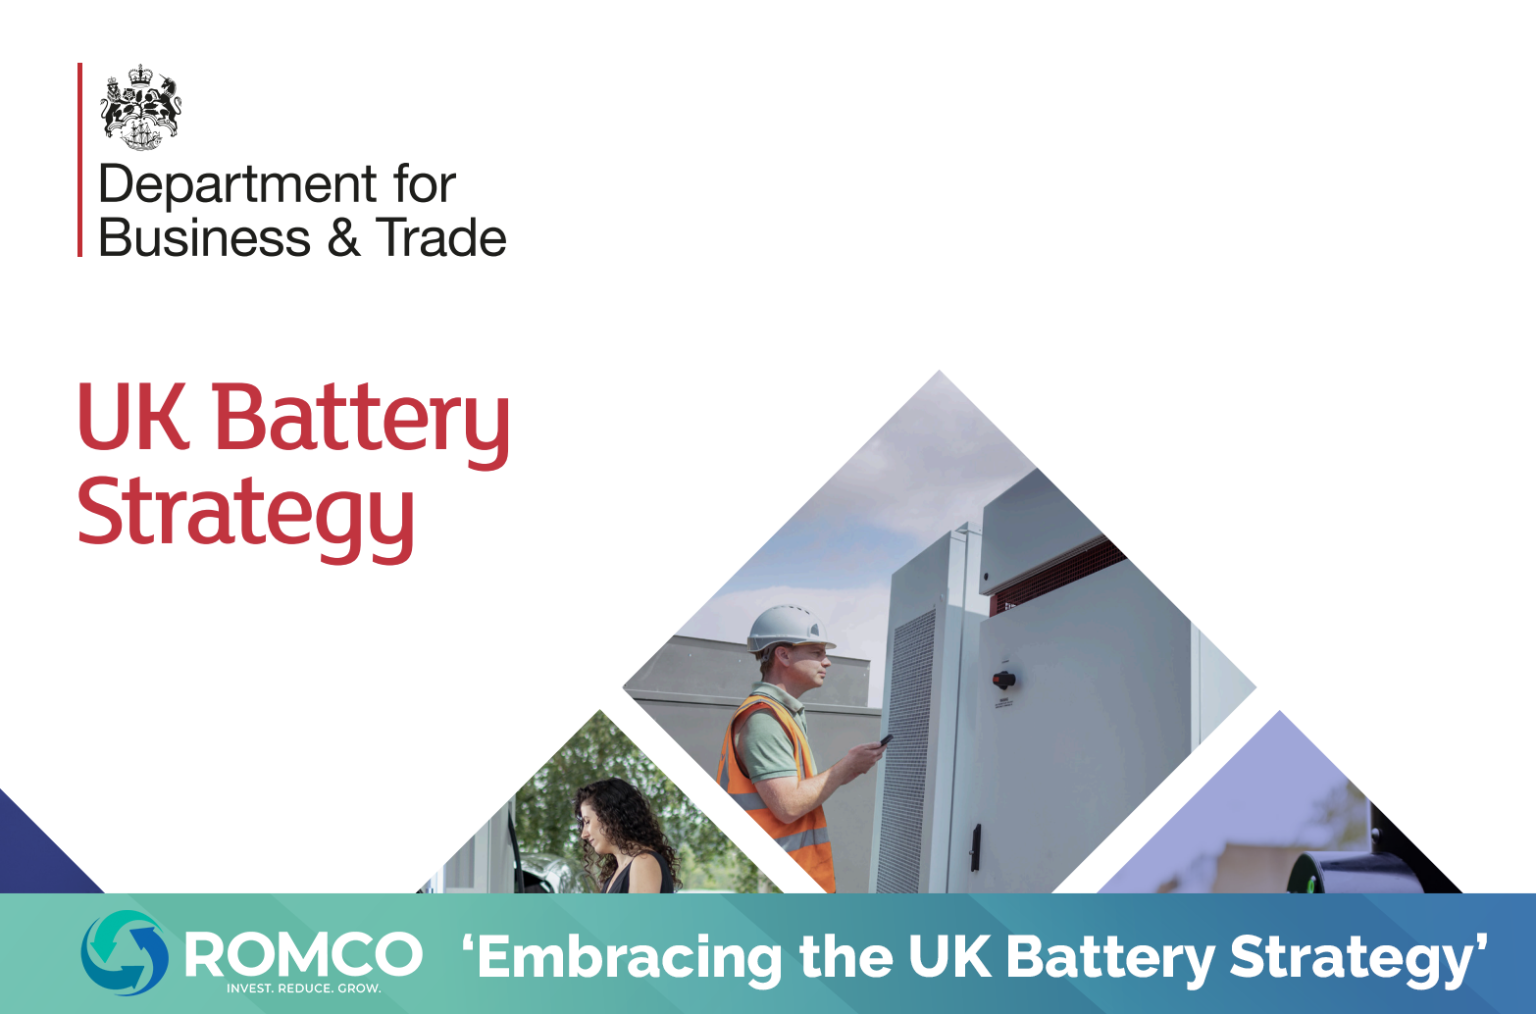 Embracing the UK Battery Strategy: Romco’s Critical Role in the Green Transition and Secure Supply of Essential Minerals